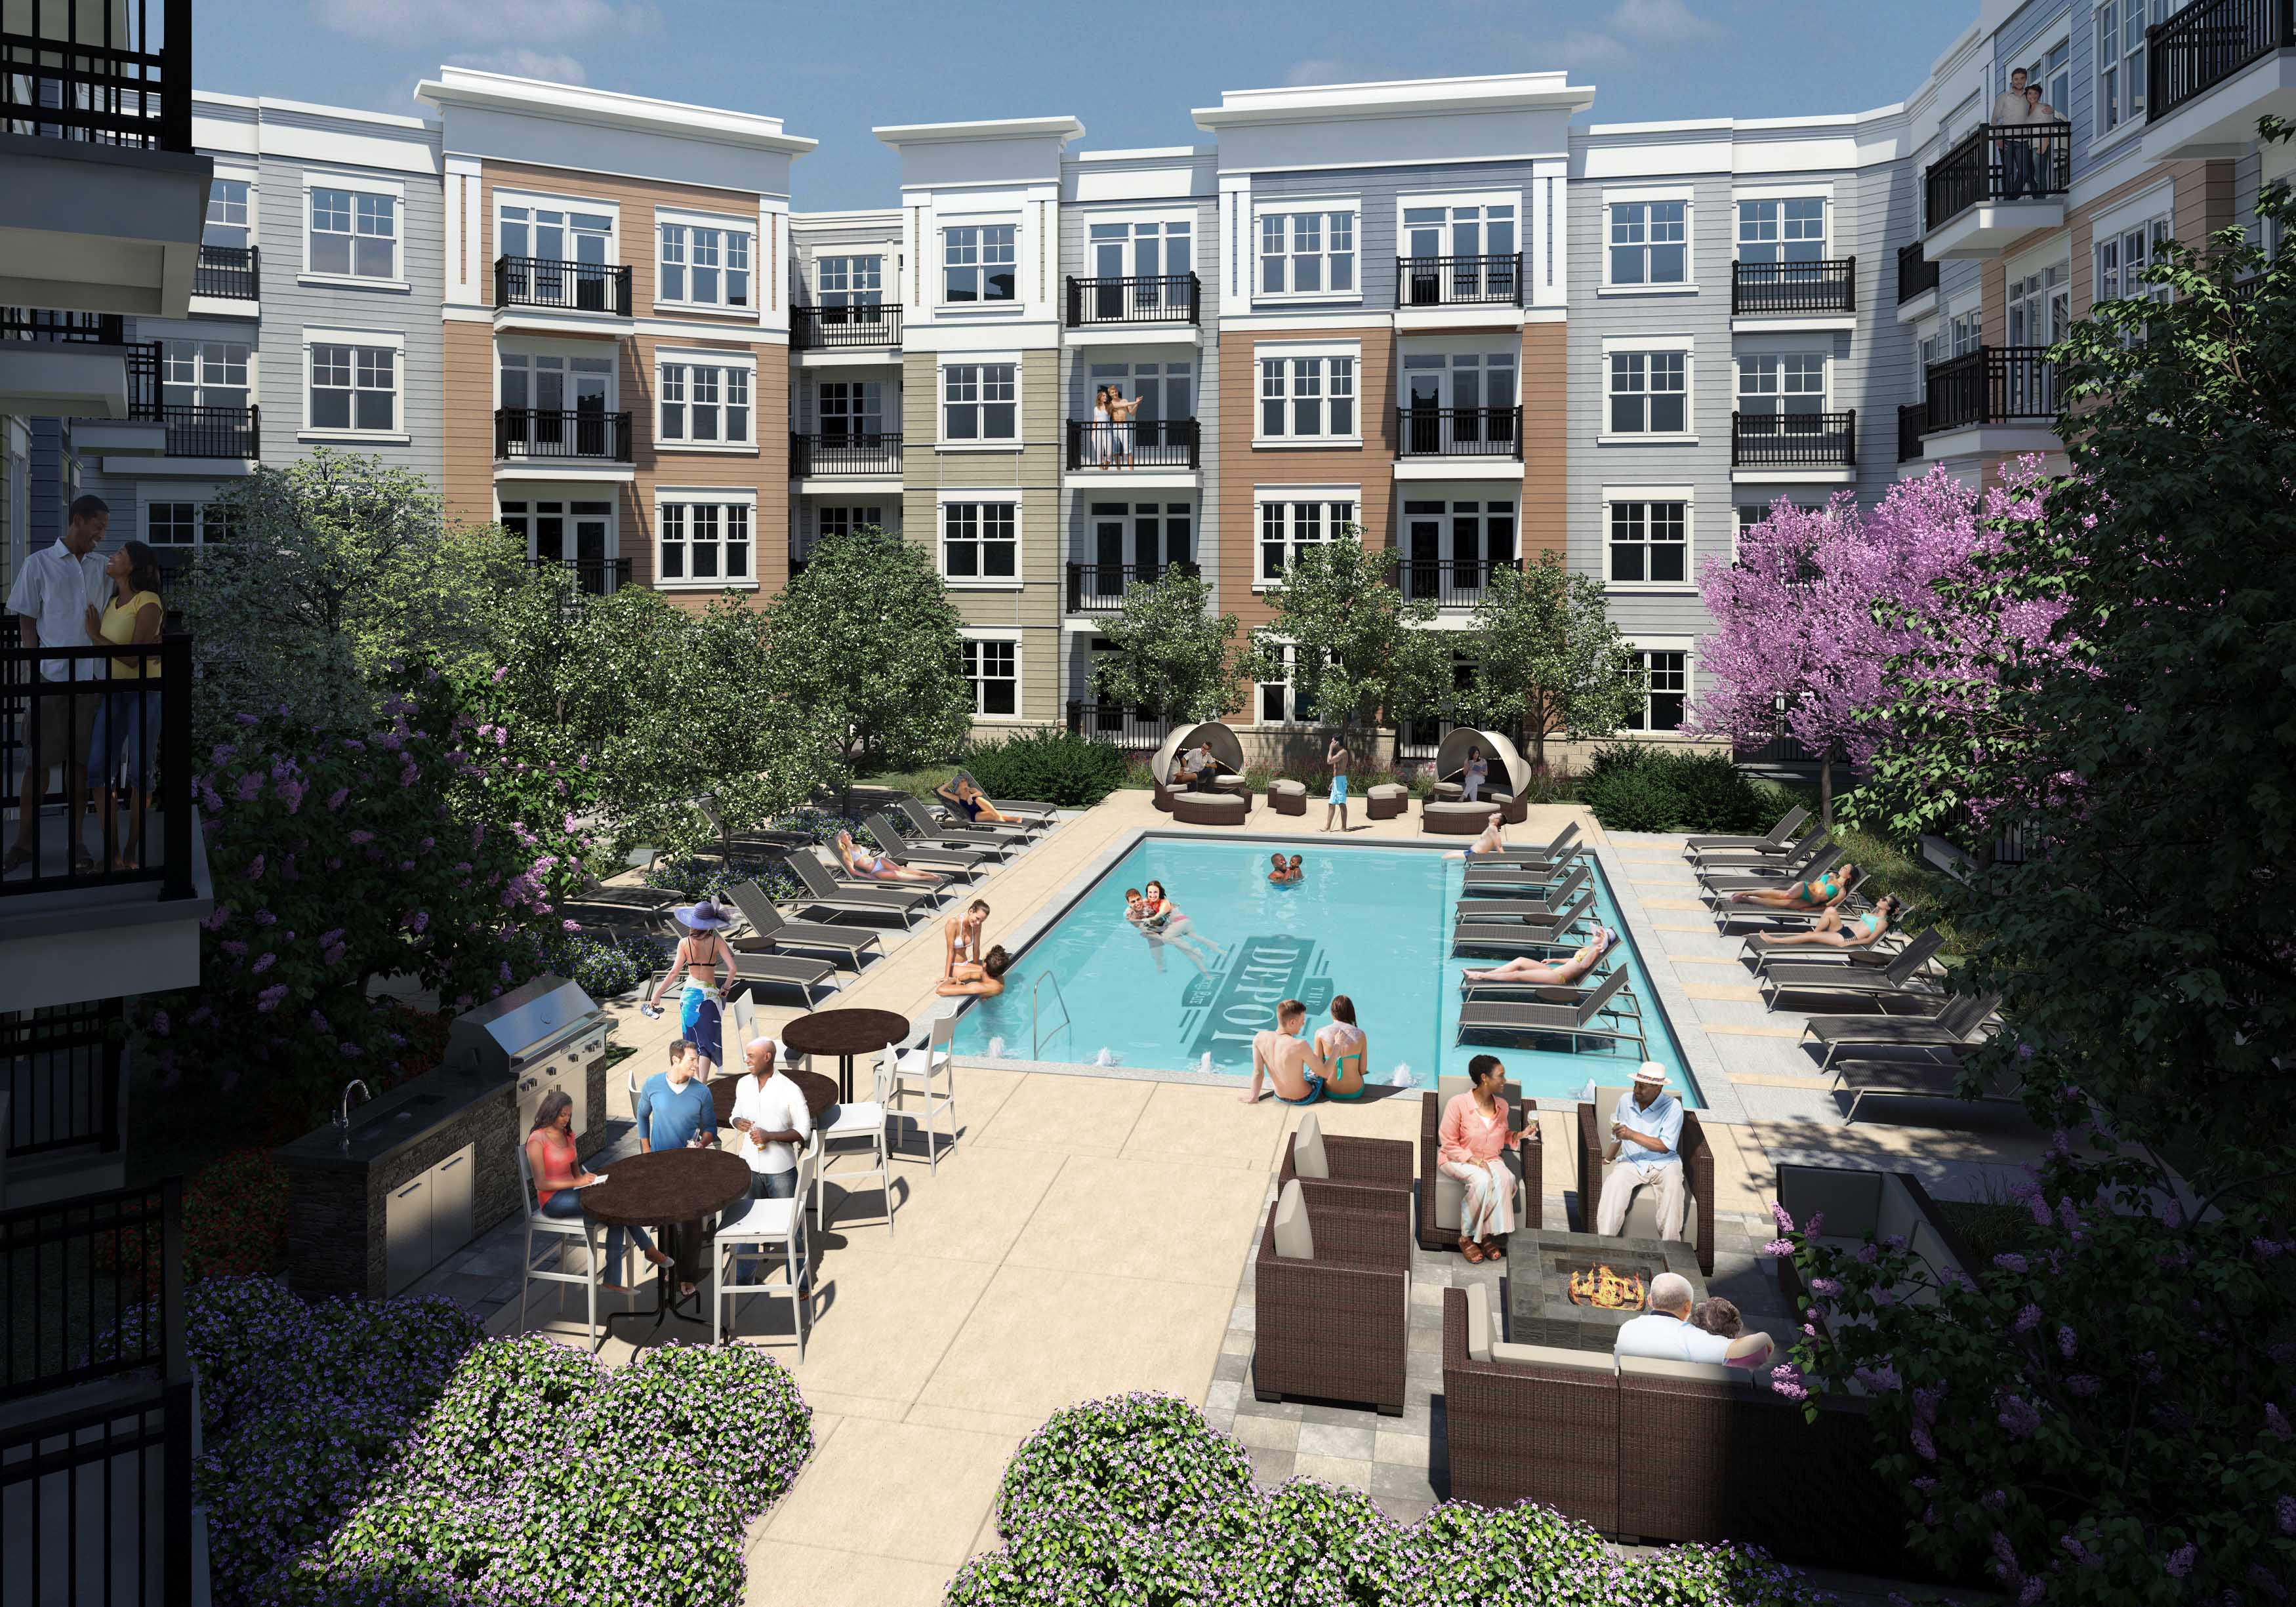 Rendering of the Depot pool courtyard which will be completed by next spring (Submitted rendering)